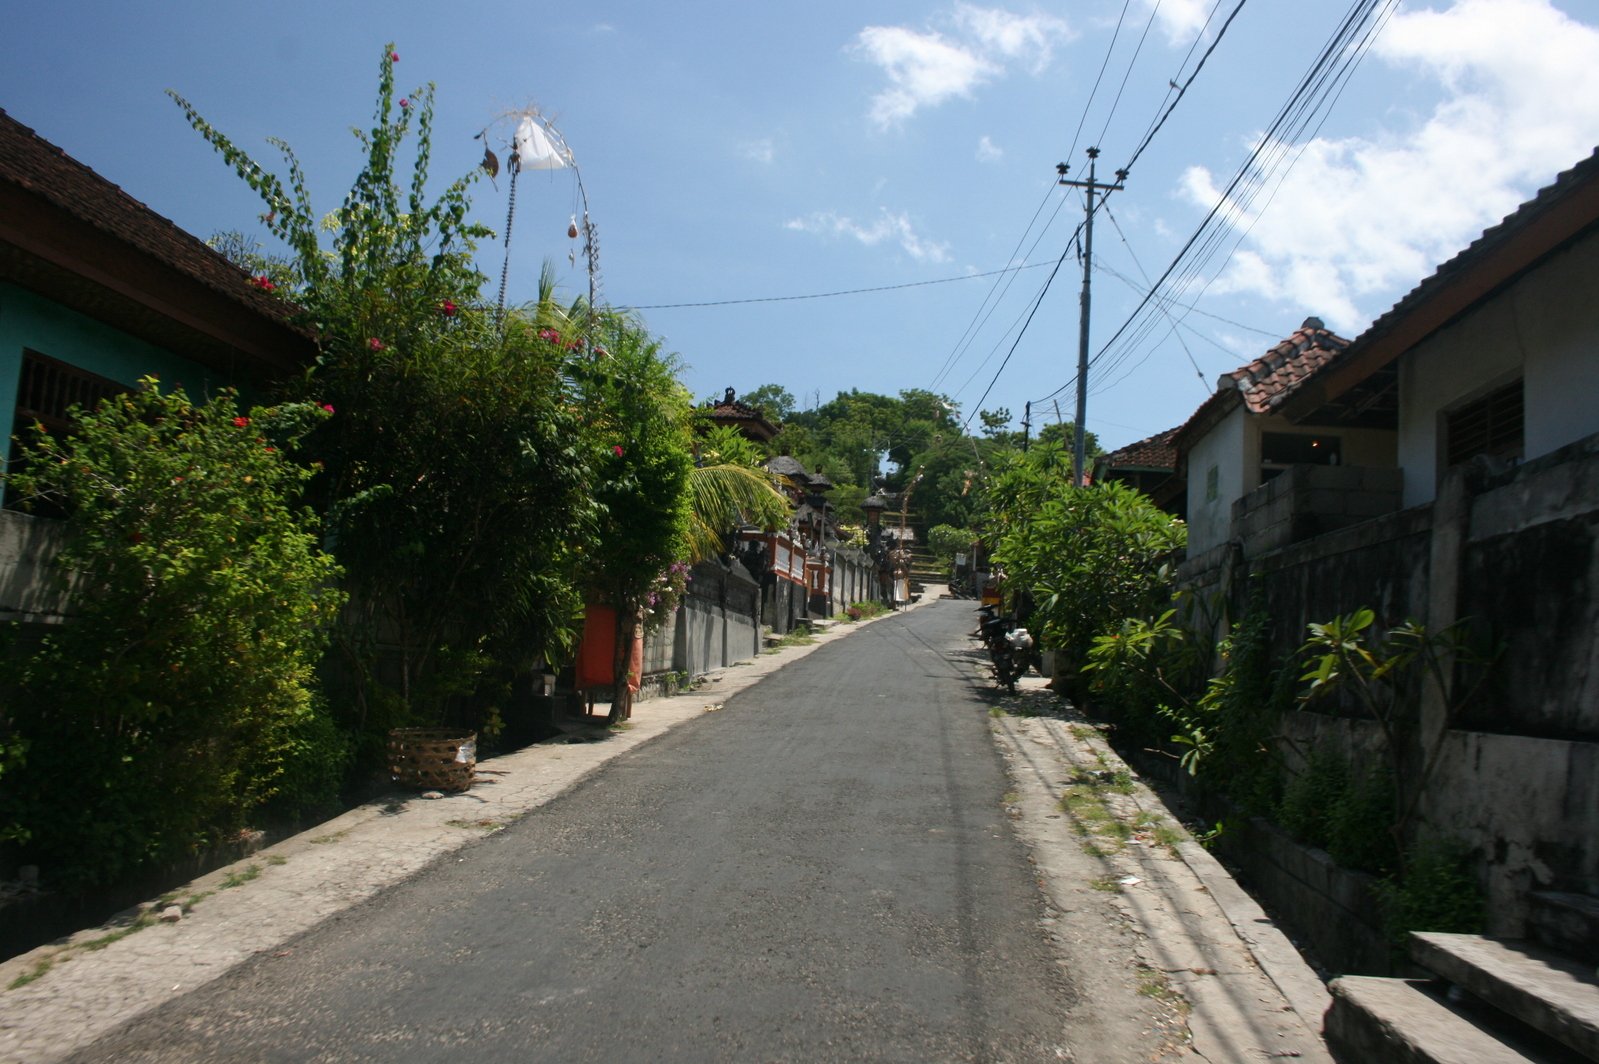 a paved street in a small village with lots of greenery and building